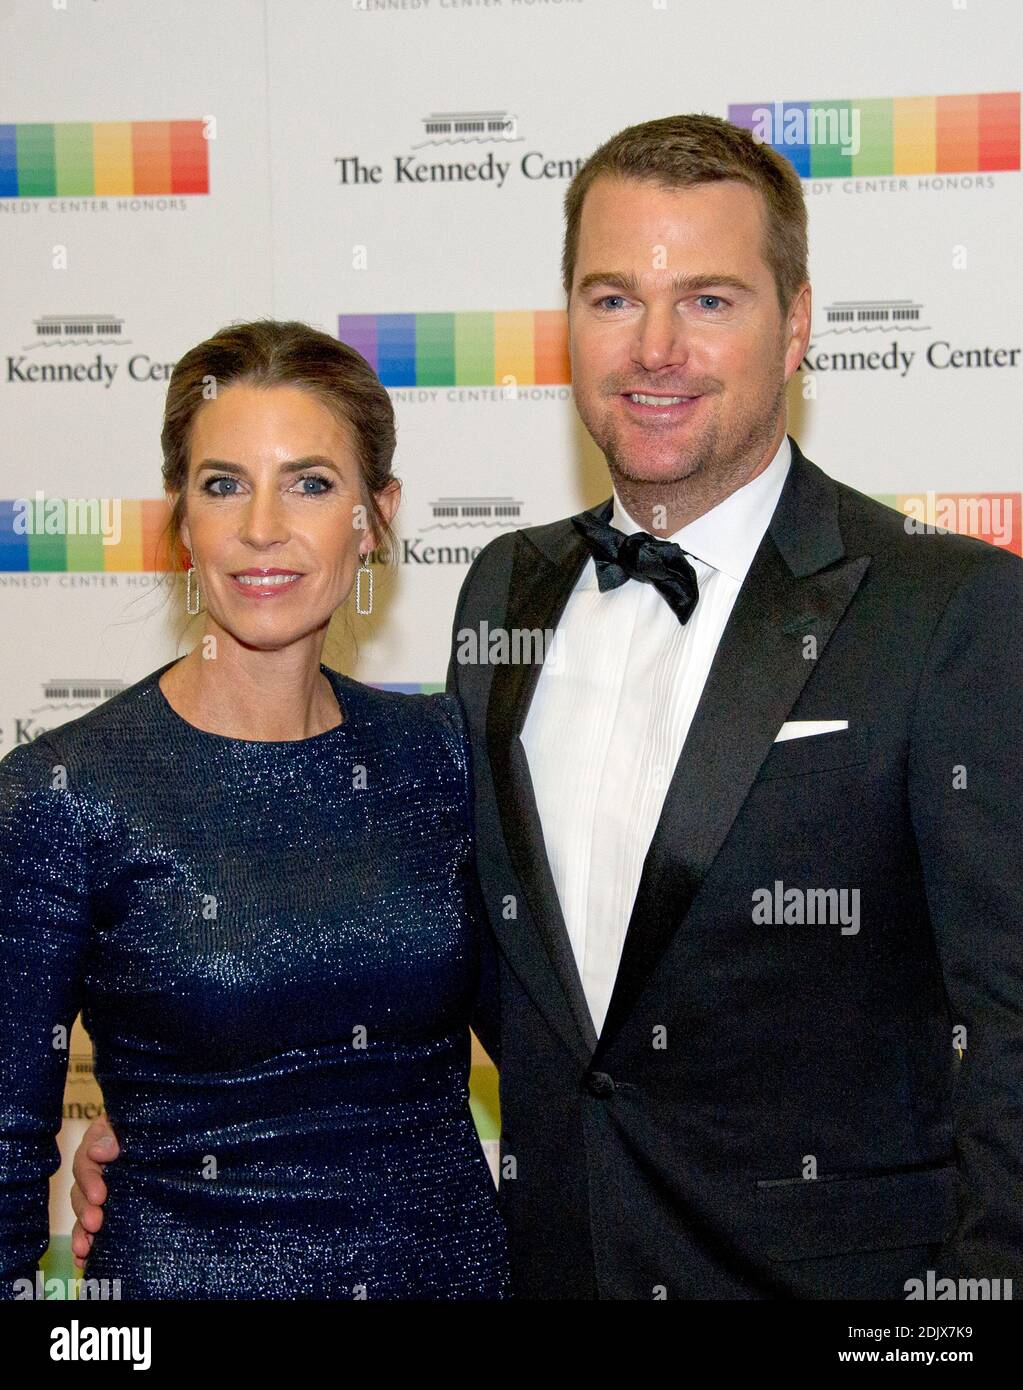 Chris O'Donnell and his wife, Caroline Fentress, arrive for the formal Artist's Dinner honoring the recipients of the 39th Annual Kennedy Center Honors hosted by United States Secretary of State John F. Kerry at the U.S. Department of State in Washington, D.C. on Saturday, December 3, 2016. The 2016 honorees are: Argentine pianist Martha Argerich; rock band the Eagles; screen and stage actor Al Pacino; gospel and blues singer Mavis Staples; and musician James Taylor. Photo by Ron Sachs /Pool via CNP/ABACAPRESS.COM Stock Photo